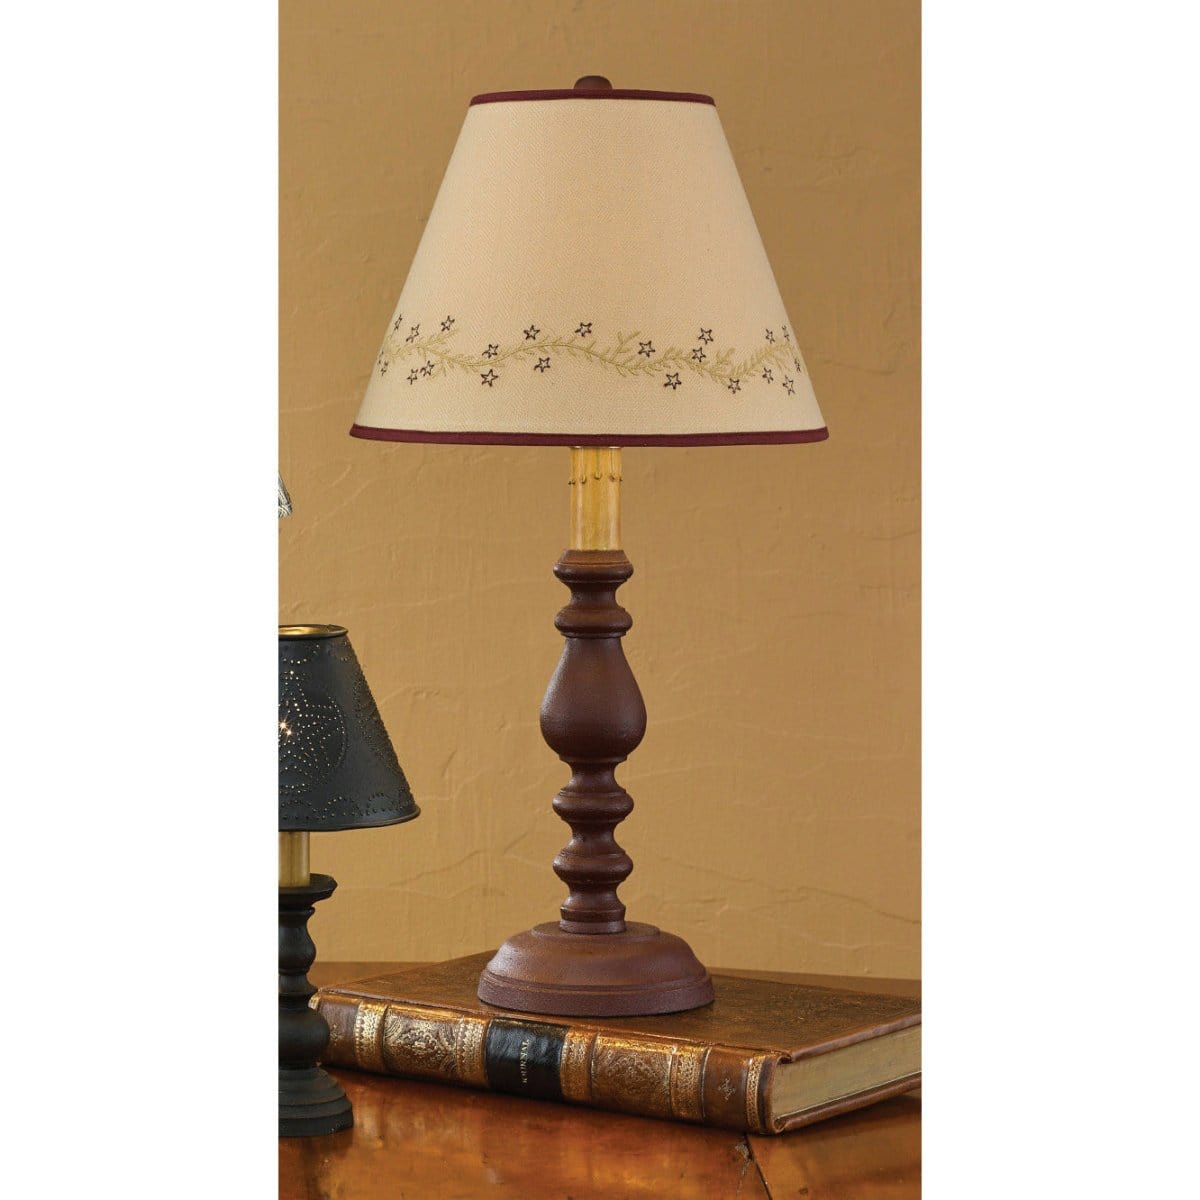 Candlestick Red Table Lamp 23" High-Park Designs-The Village Merchant